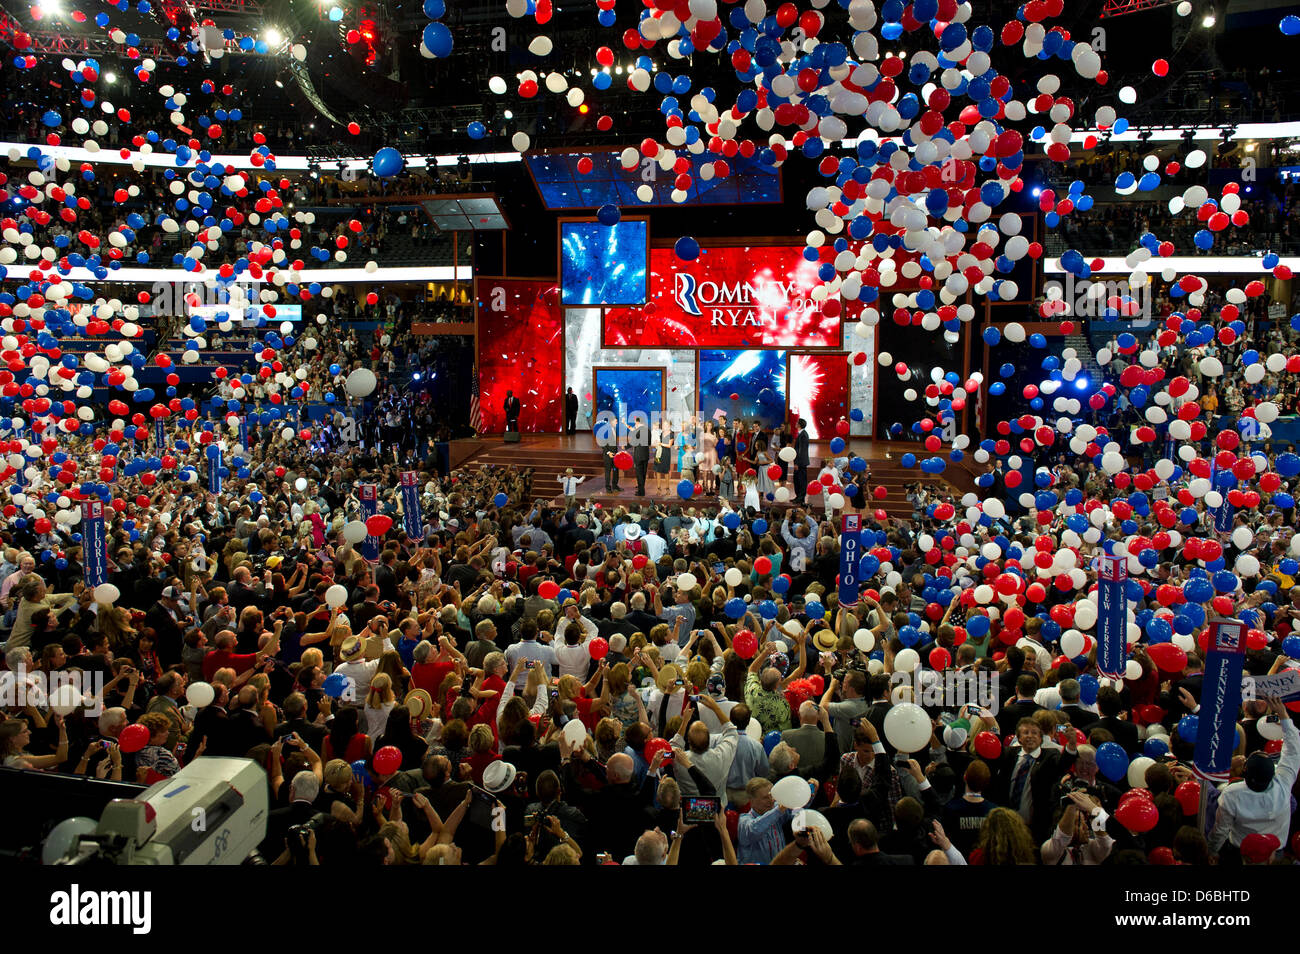 Balloon drop following Mitt Romney's remarks at the 2012 Republican National Convention in Tampa Bay, Florida on Thursday, August 30, 2012. .Credit: Ron Sachs / CNP.(RESTRICTION: NO New York or New Jersey Newspapers or newspapers within a 75 mile radius of New York City) Stock Photo